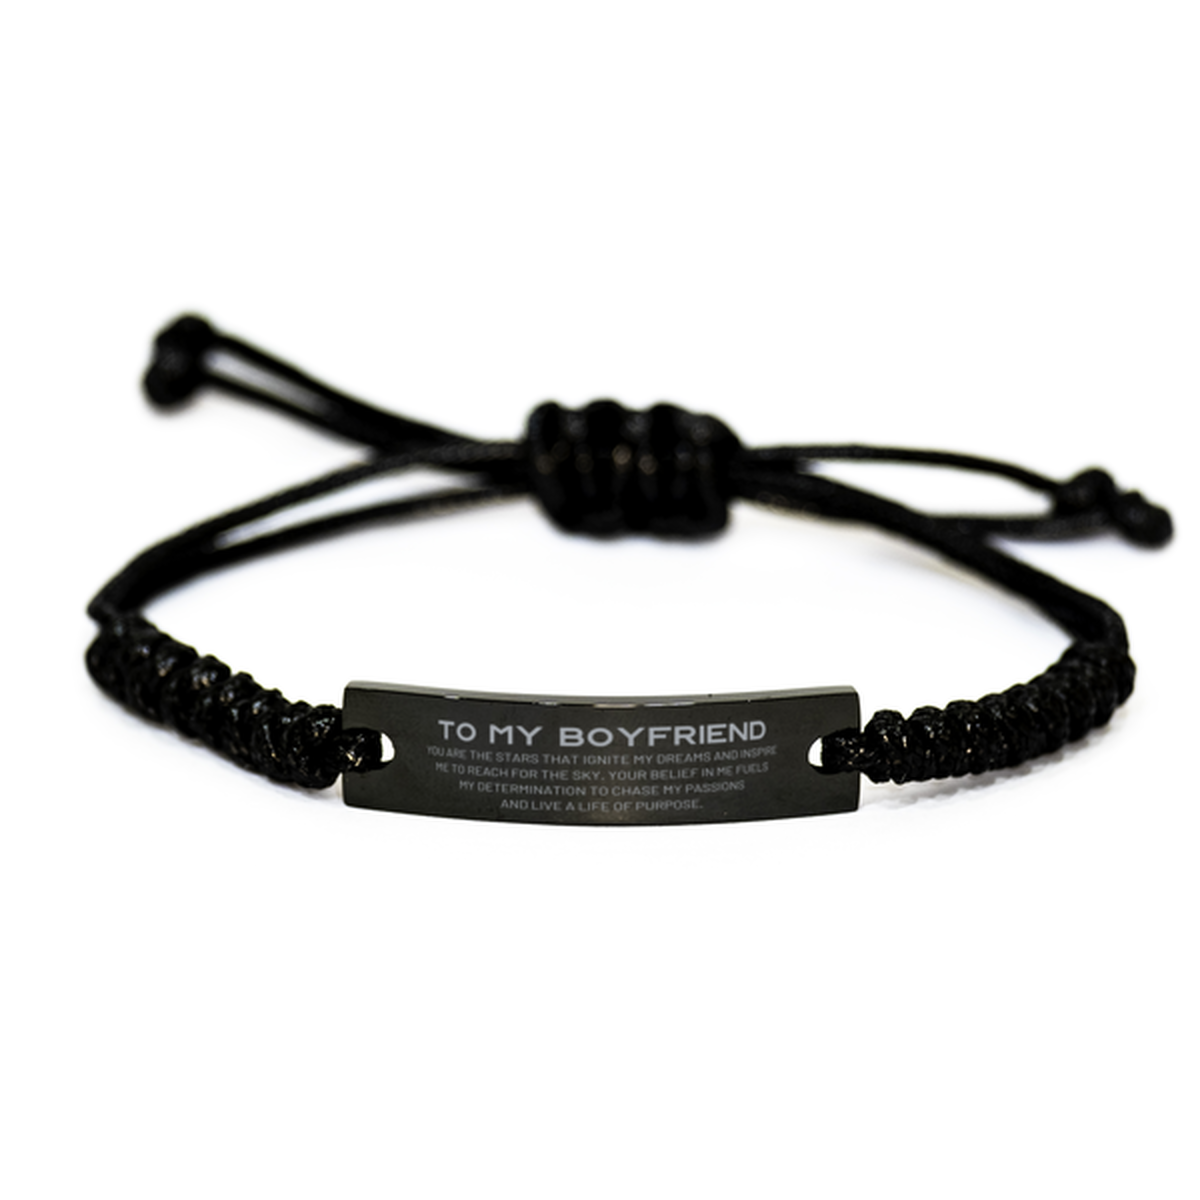 To My Boyfriend Black Rope Bracelet, You are the stars that ignite my dreams and inspire me to reach for the sky, Birthday Unique Gifts For Boyfriend, Thank You Gifts For Boyfriend